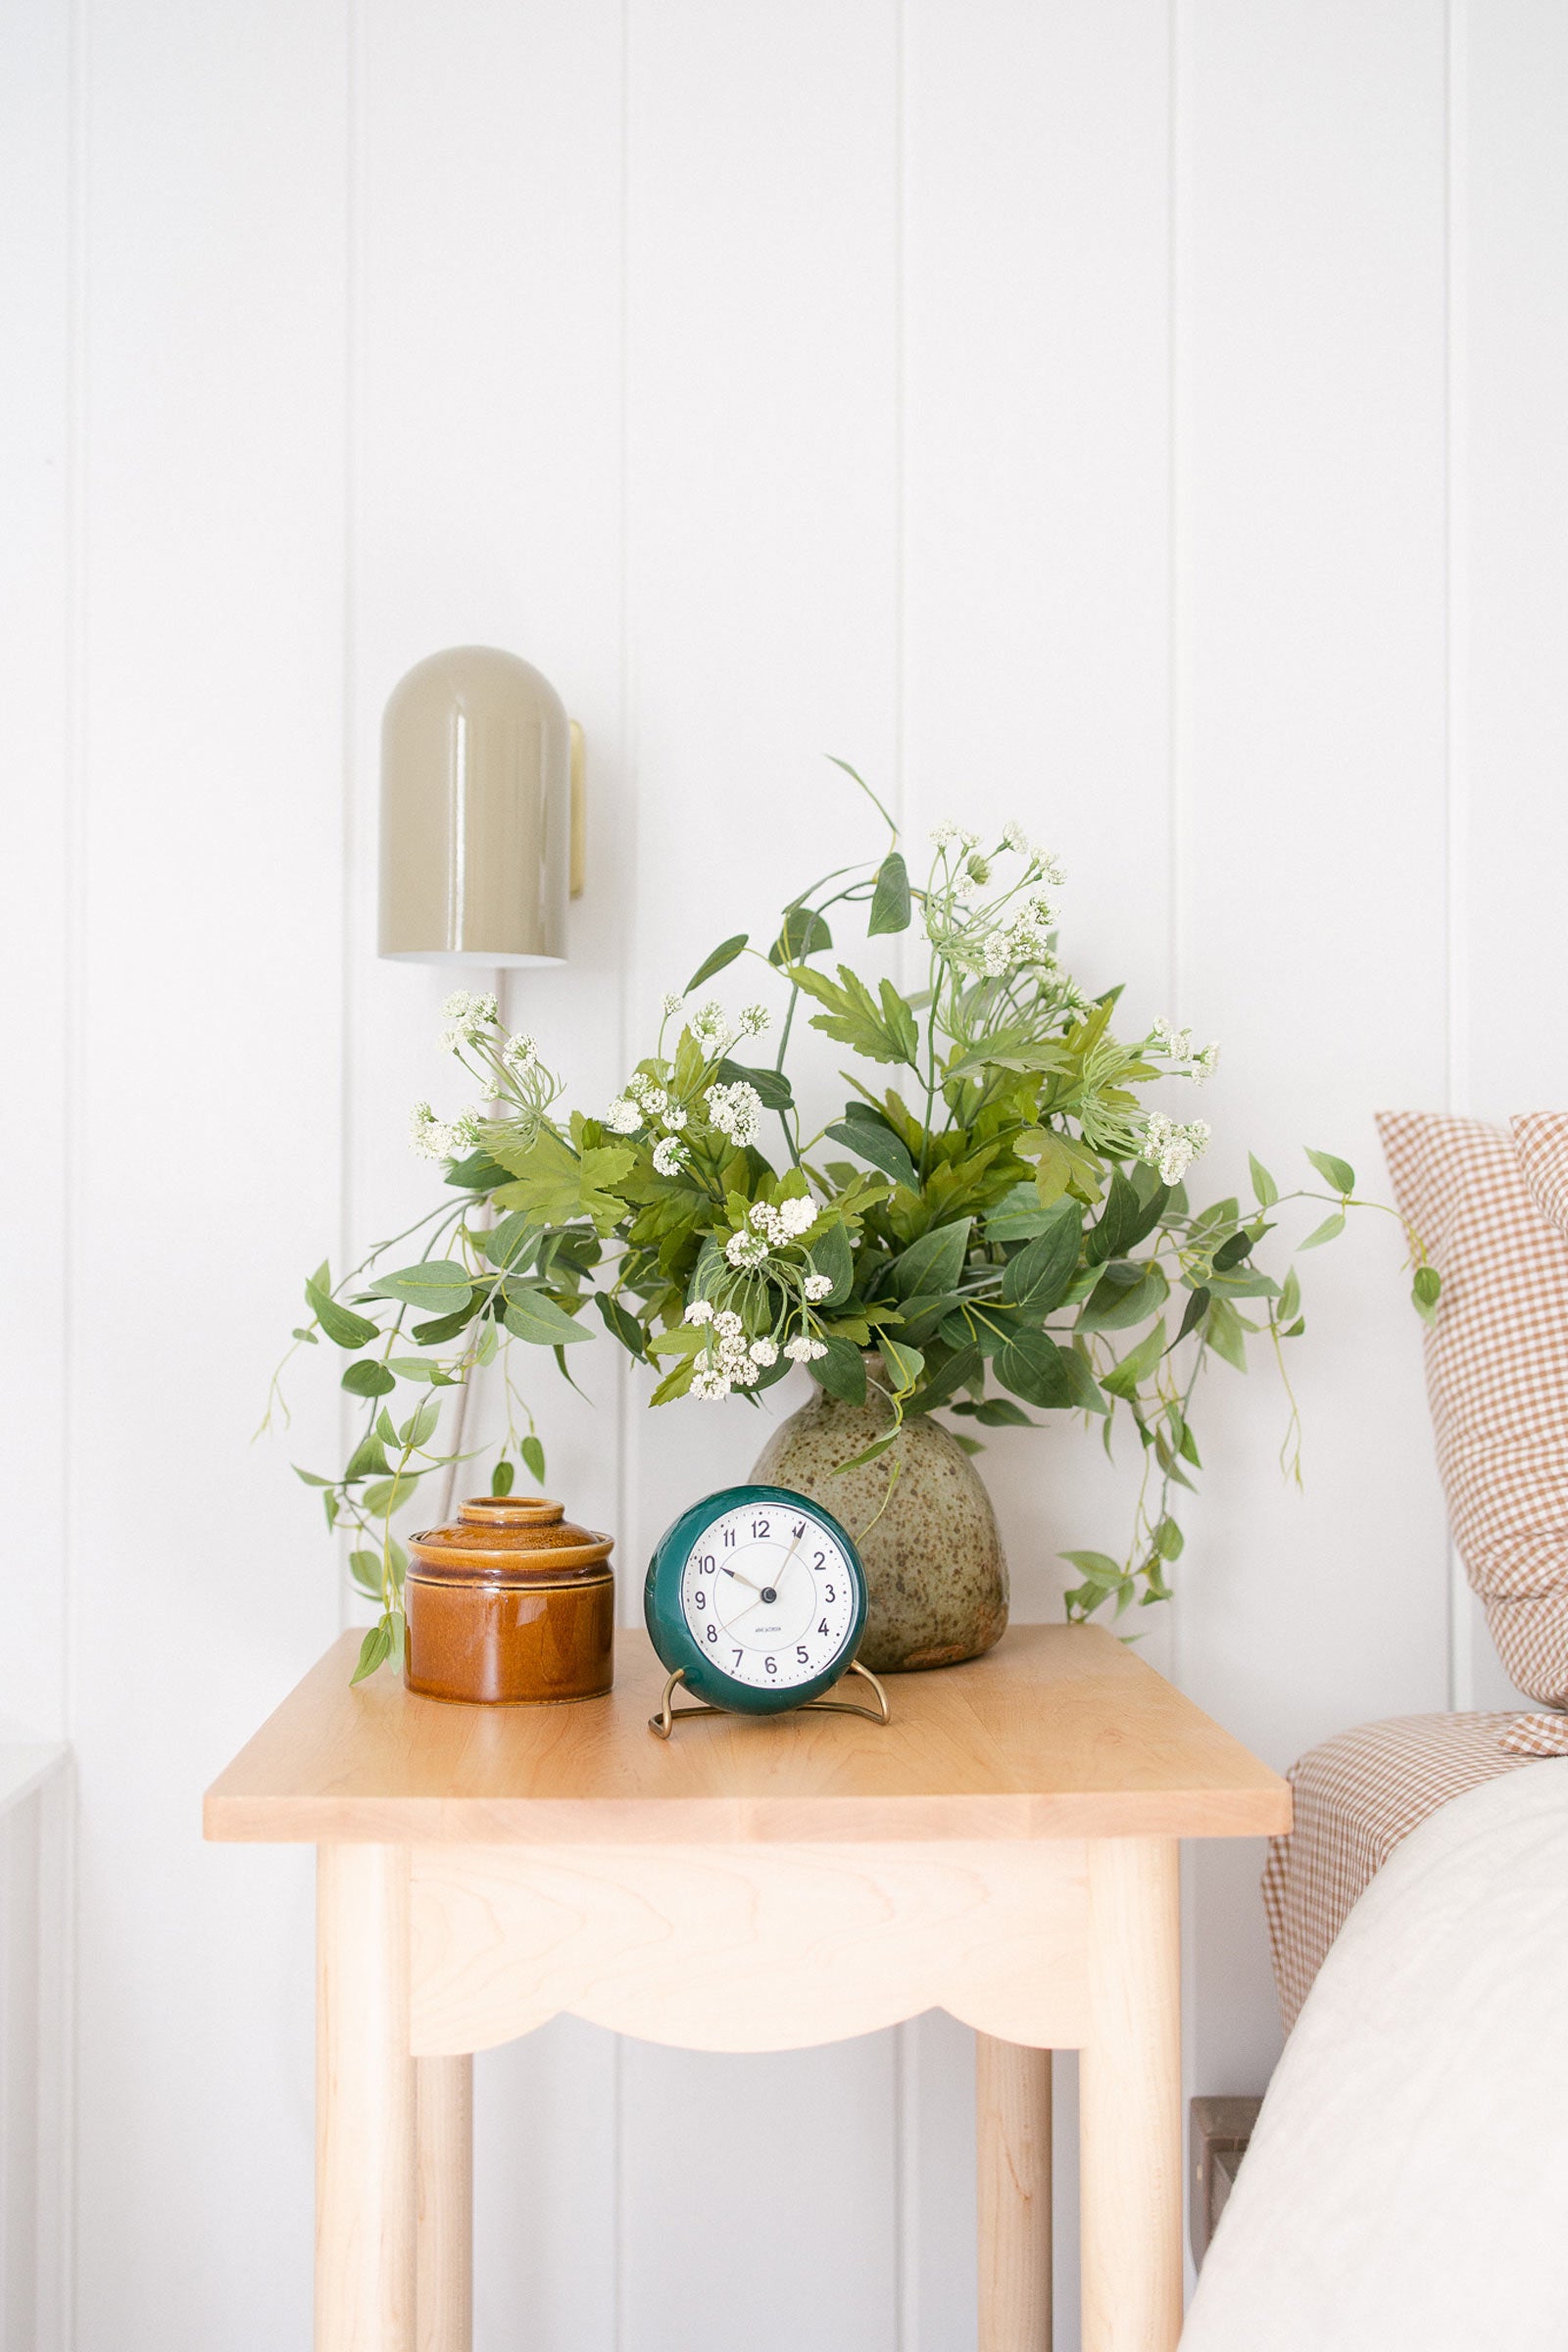 a wooden scalloped side table with lush greenery and small blue clock and auburn ceramic jar.